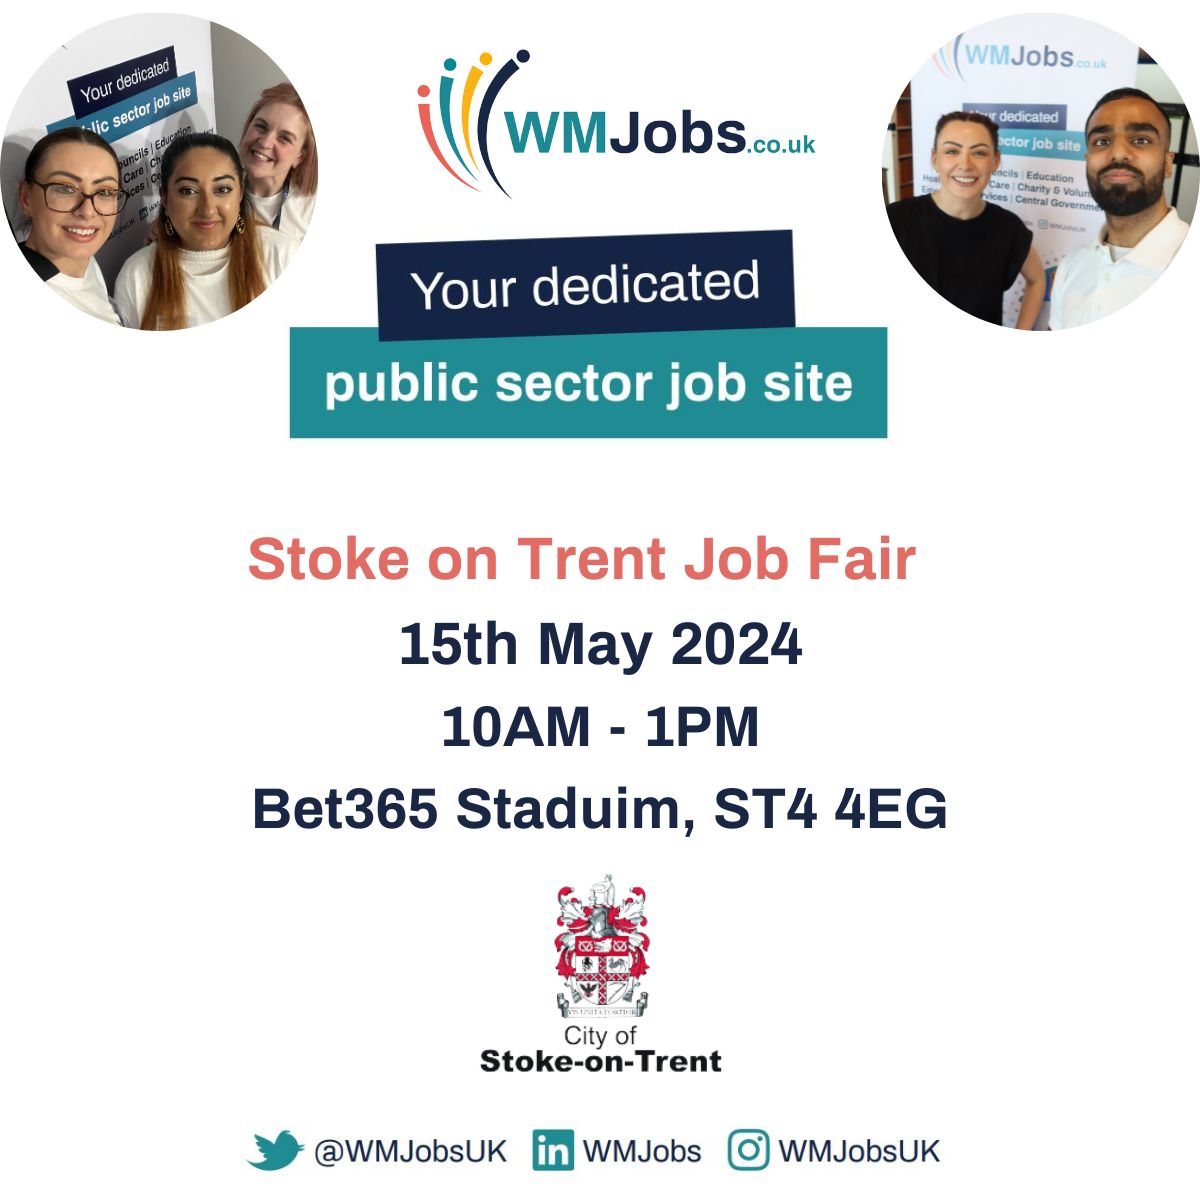 🎉 The WMJobs team will be at the Bet365 Stadium next Wednesday, joined by Stoke-on-Trent City Council. 

Come along to learn more about opportunities in the Public Sector and your area! 🔍

We'll be there from 10AM-1PM

@sotcitycouncil

#Stoke #JobsFair #WMJobs #PublicSector